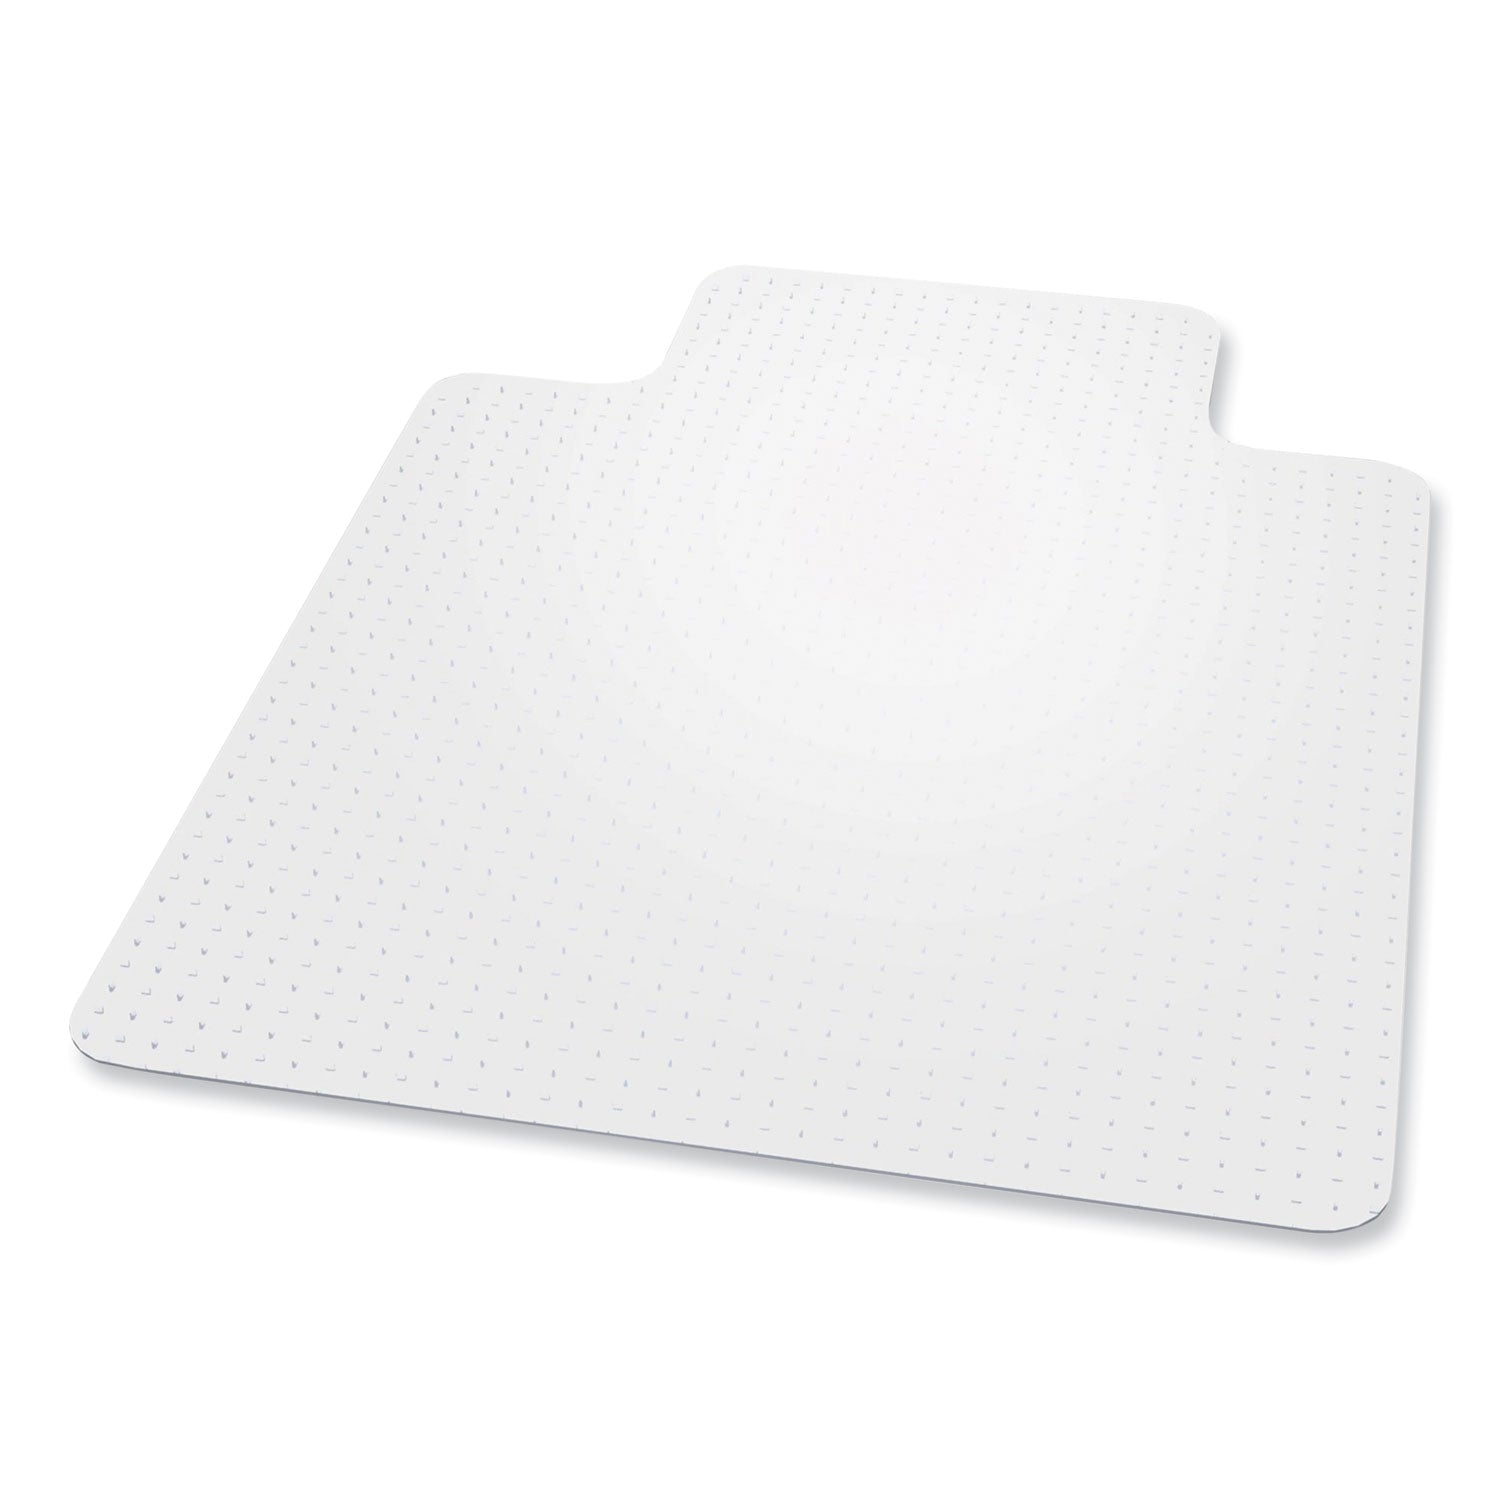 everlife-chair-mat-for-flat-pile-carpet-with-lip-36-x-48-clear-ships-in-4-6-business-days_esr121831 - 1